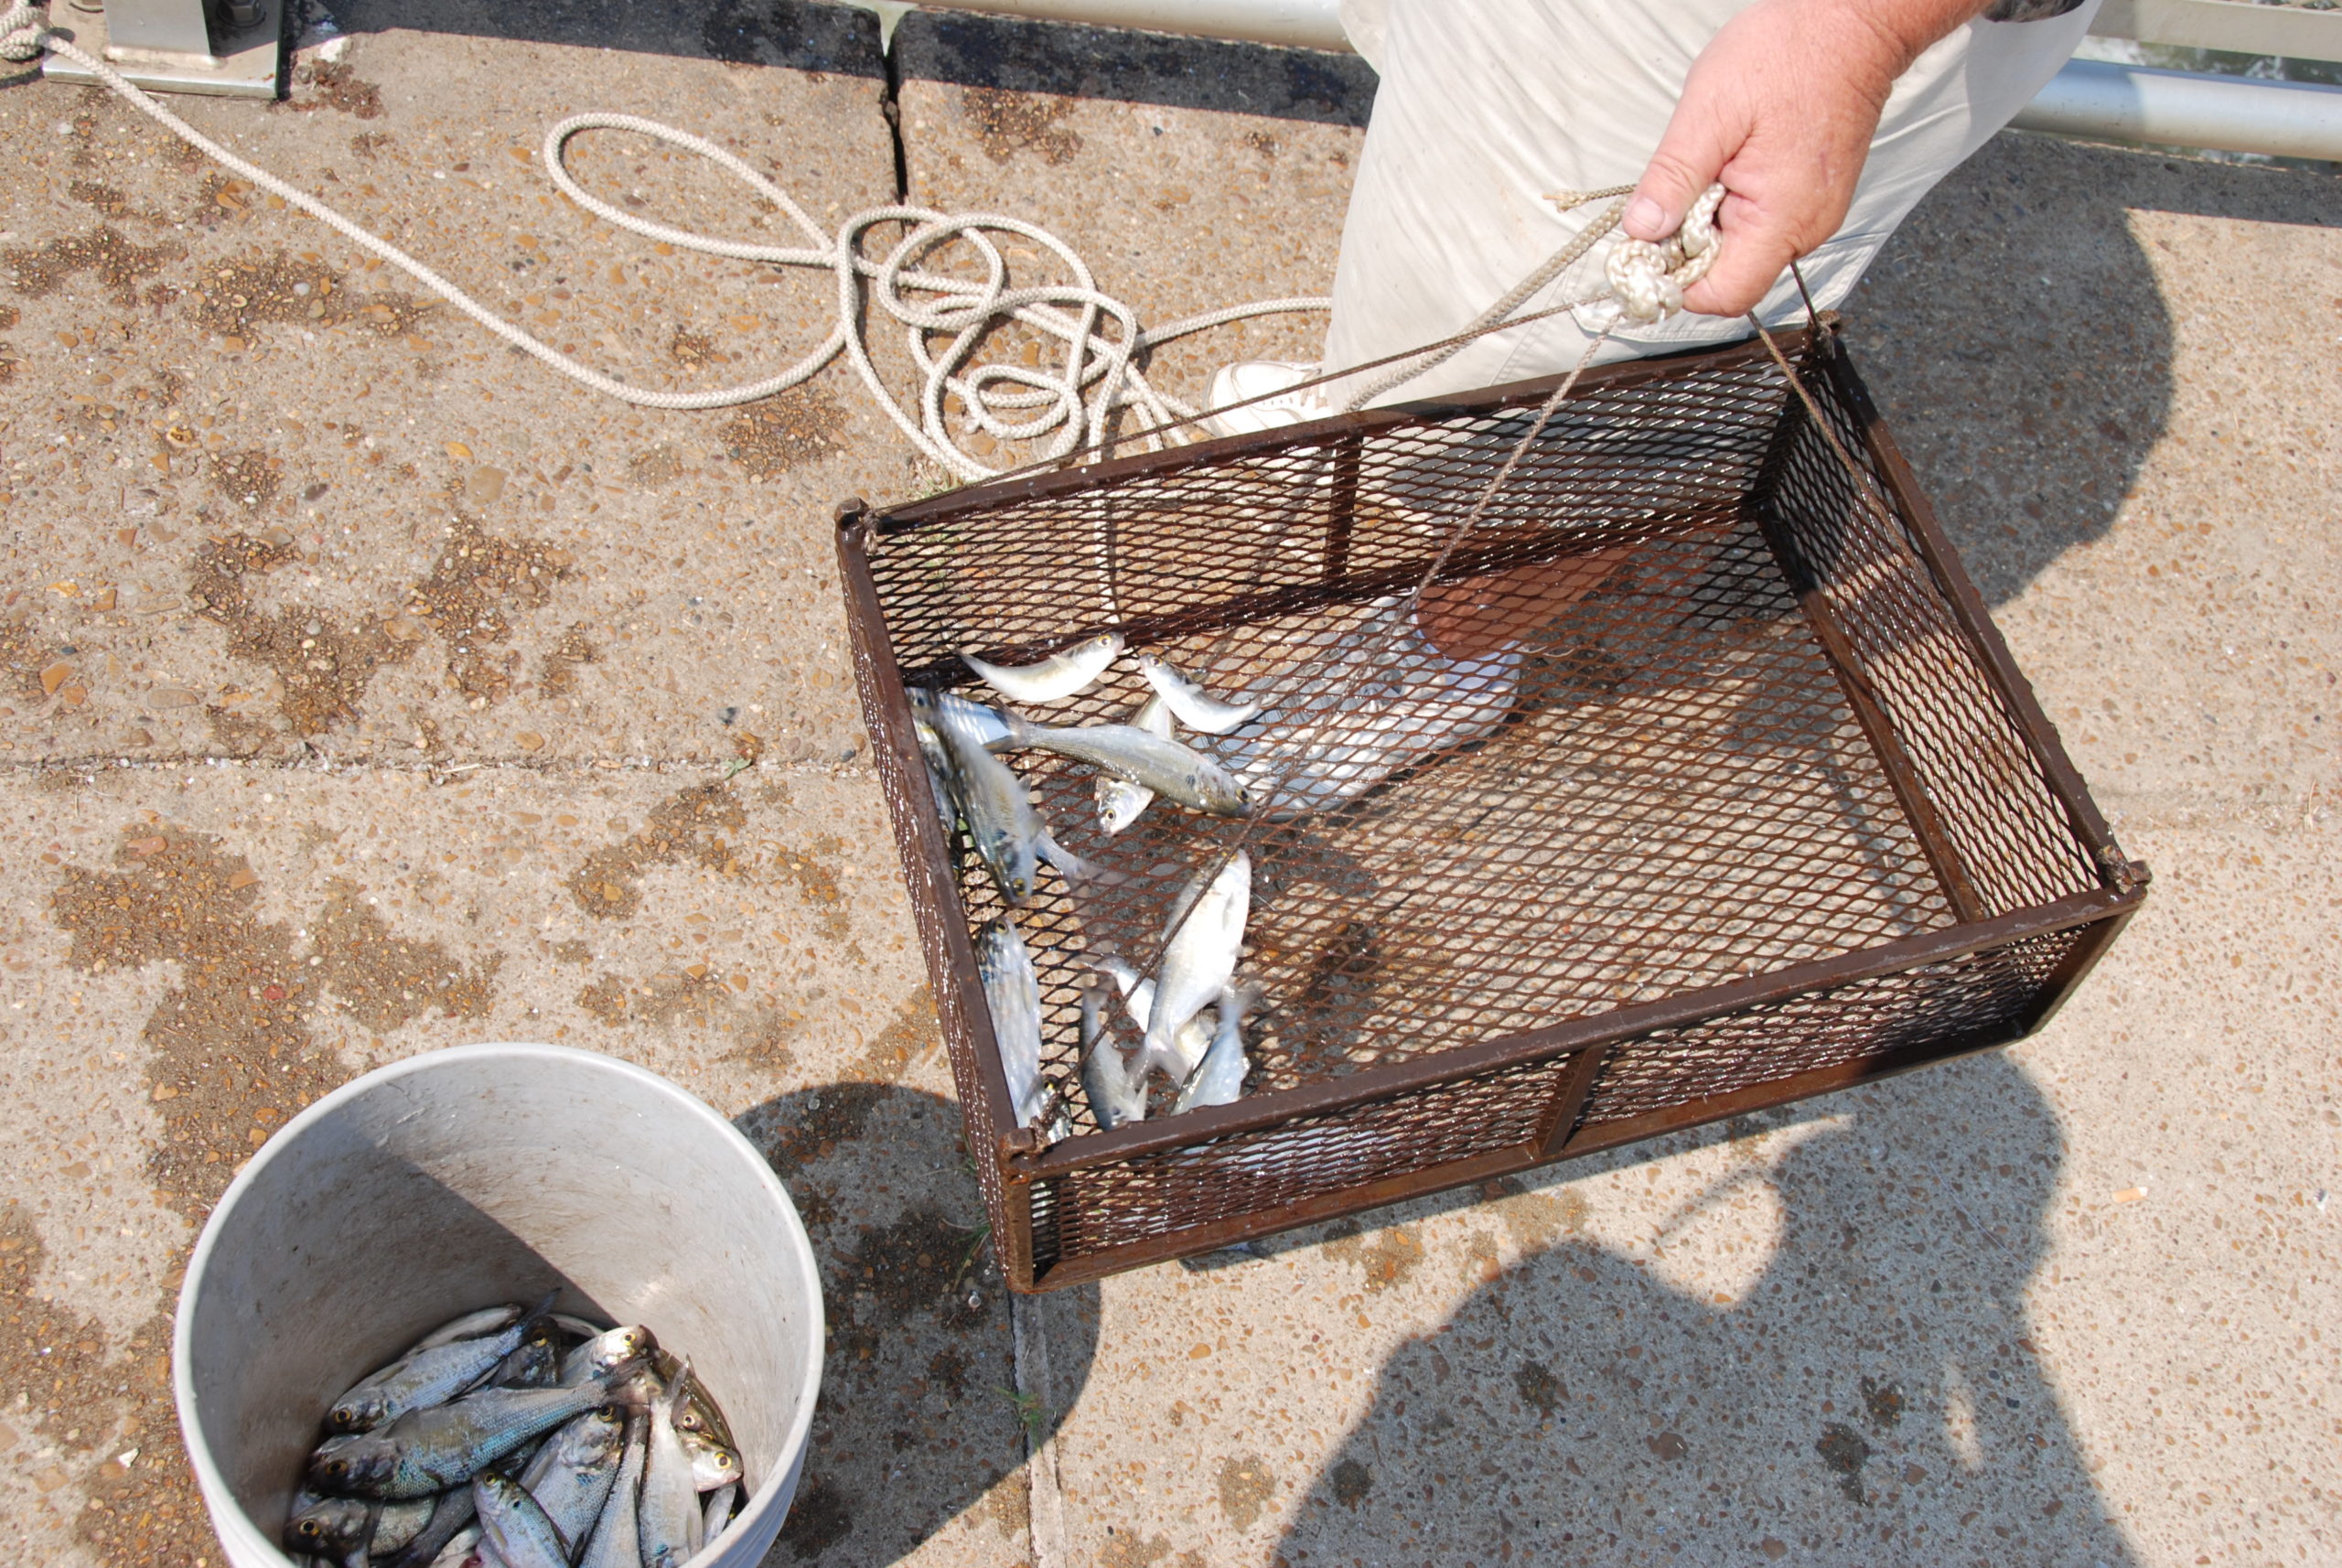 David Wall feels it's a waste of time to fish for catfish at